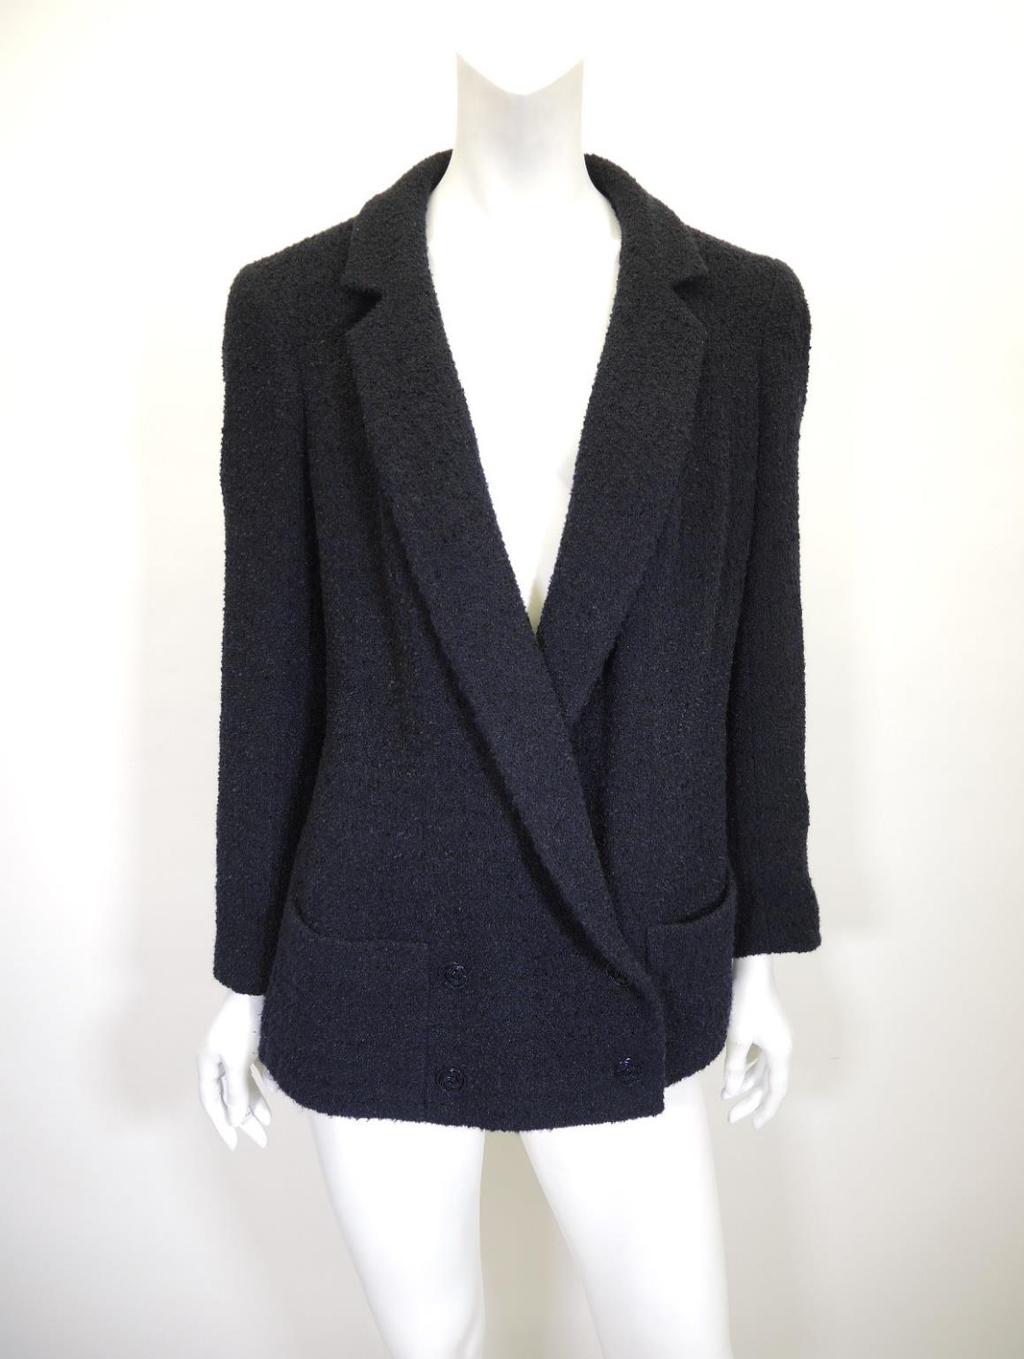 CHANEL Navy Boucle Tweed Boyfriend Jacket Size 8 Sold in one day for $899.